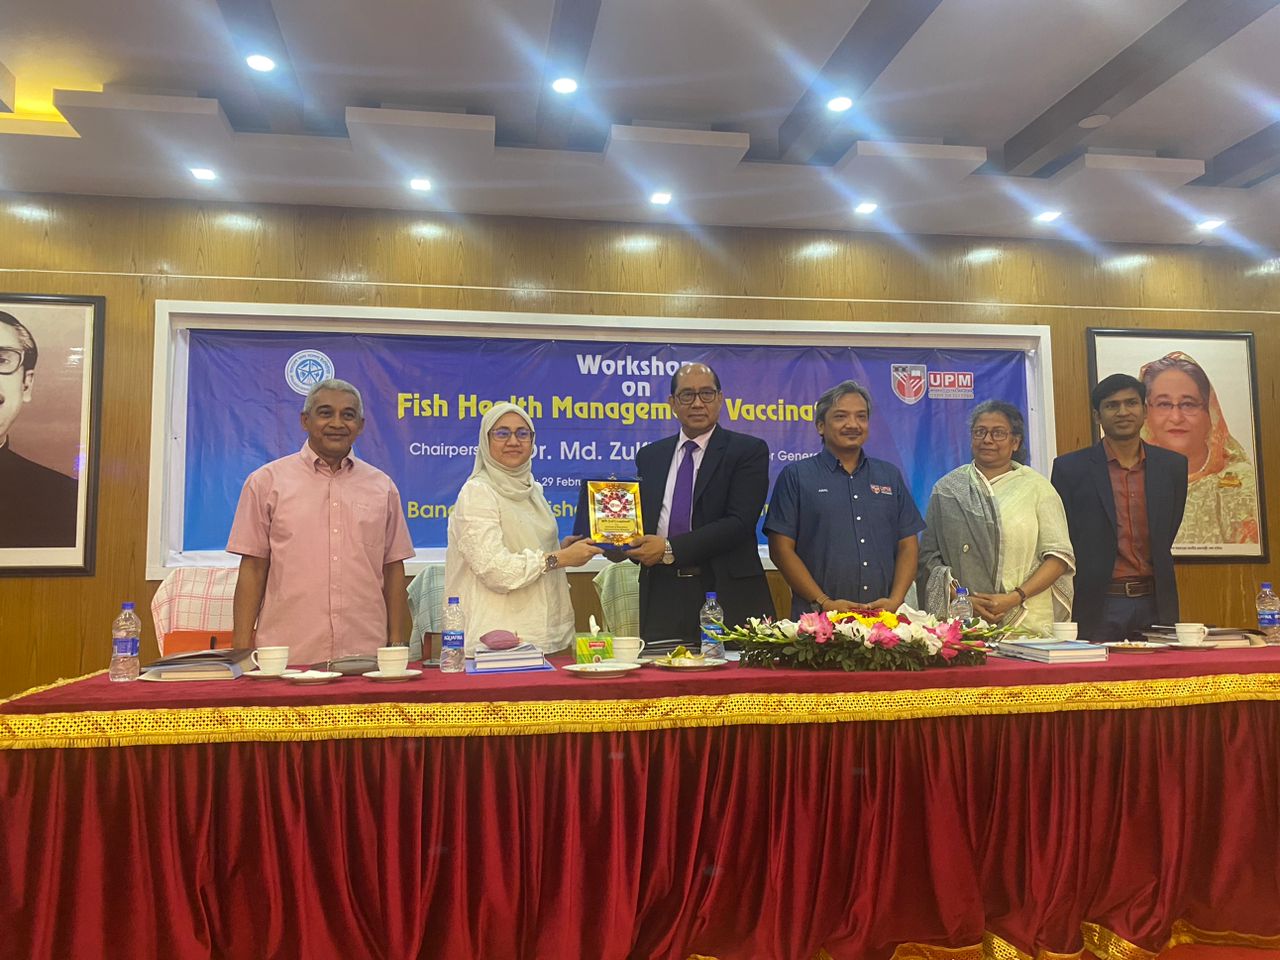 Workshop on Fish Health Management held at the Bangladesh Fisheries Research Institute (BFRI)